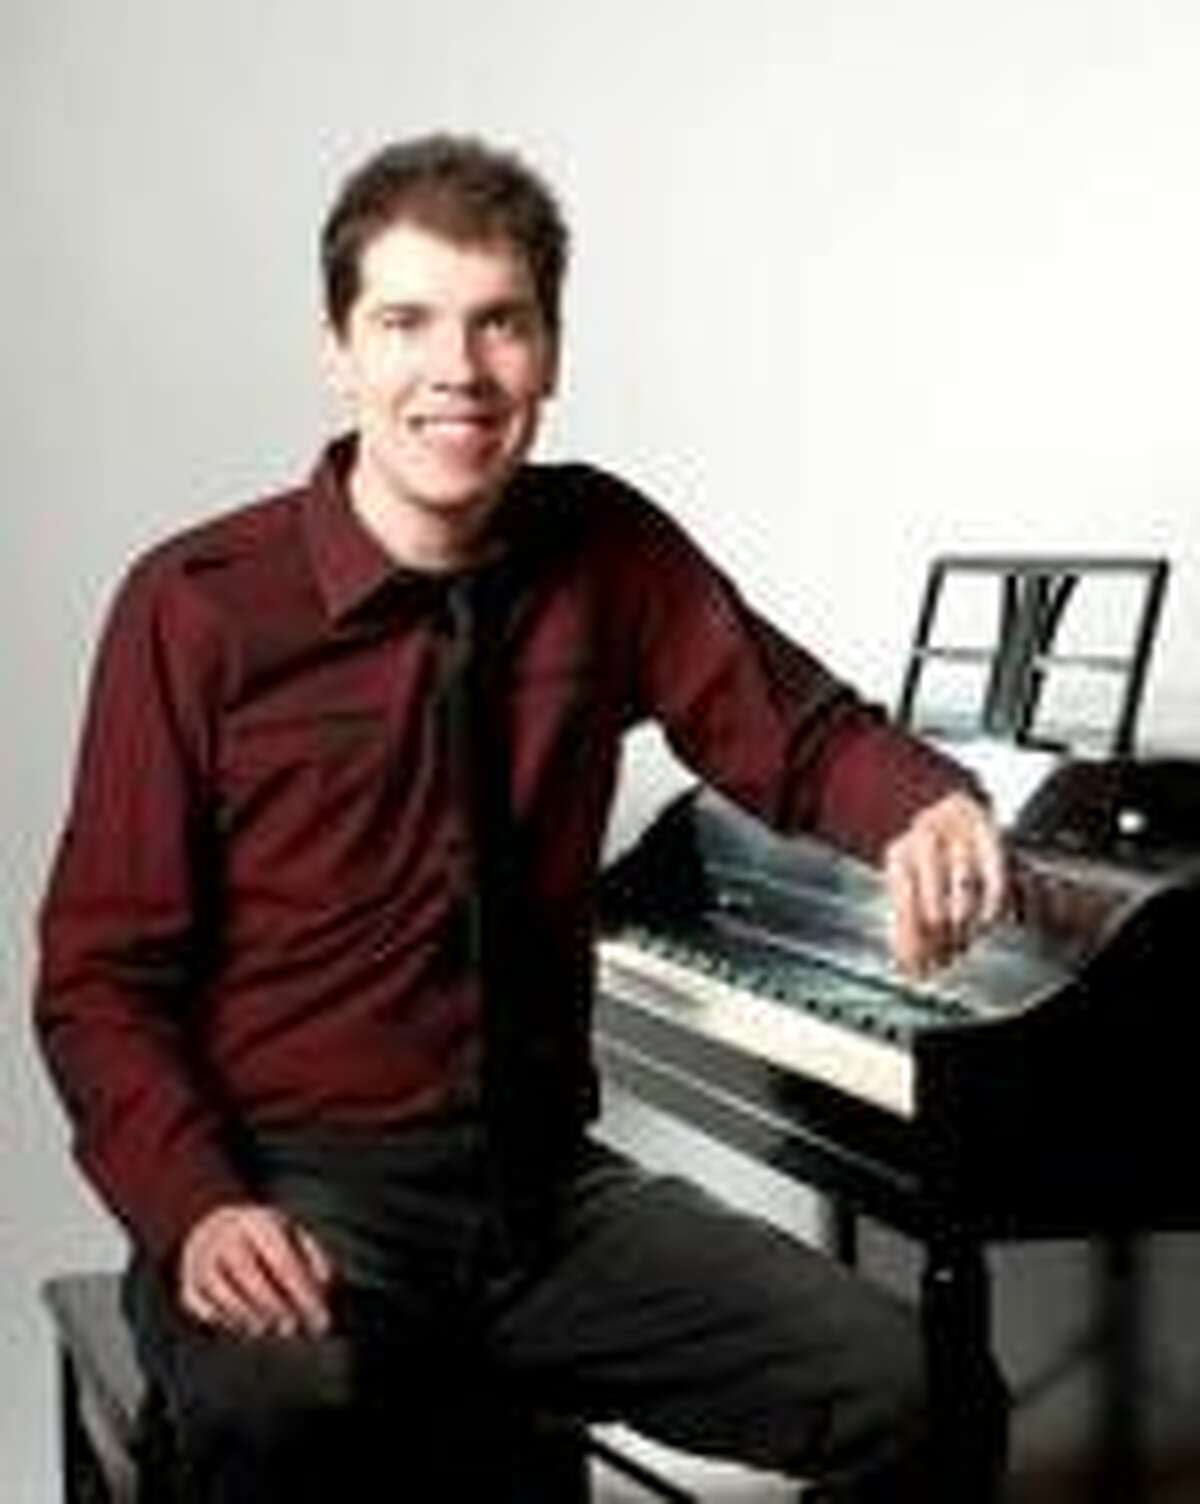 Jason Coleman is a piano artist and grandson of country music legend Floyd Cramer.